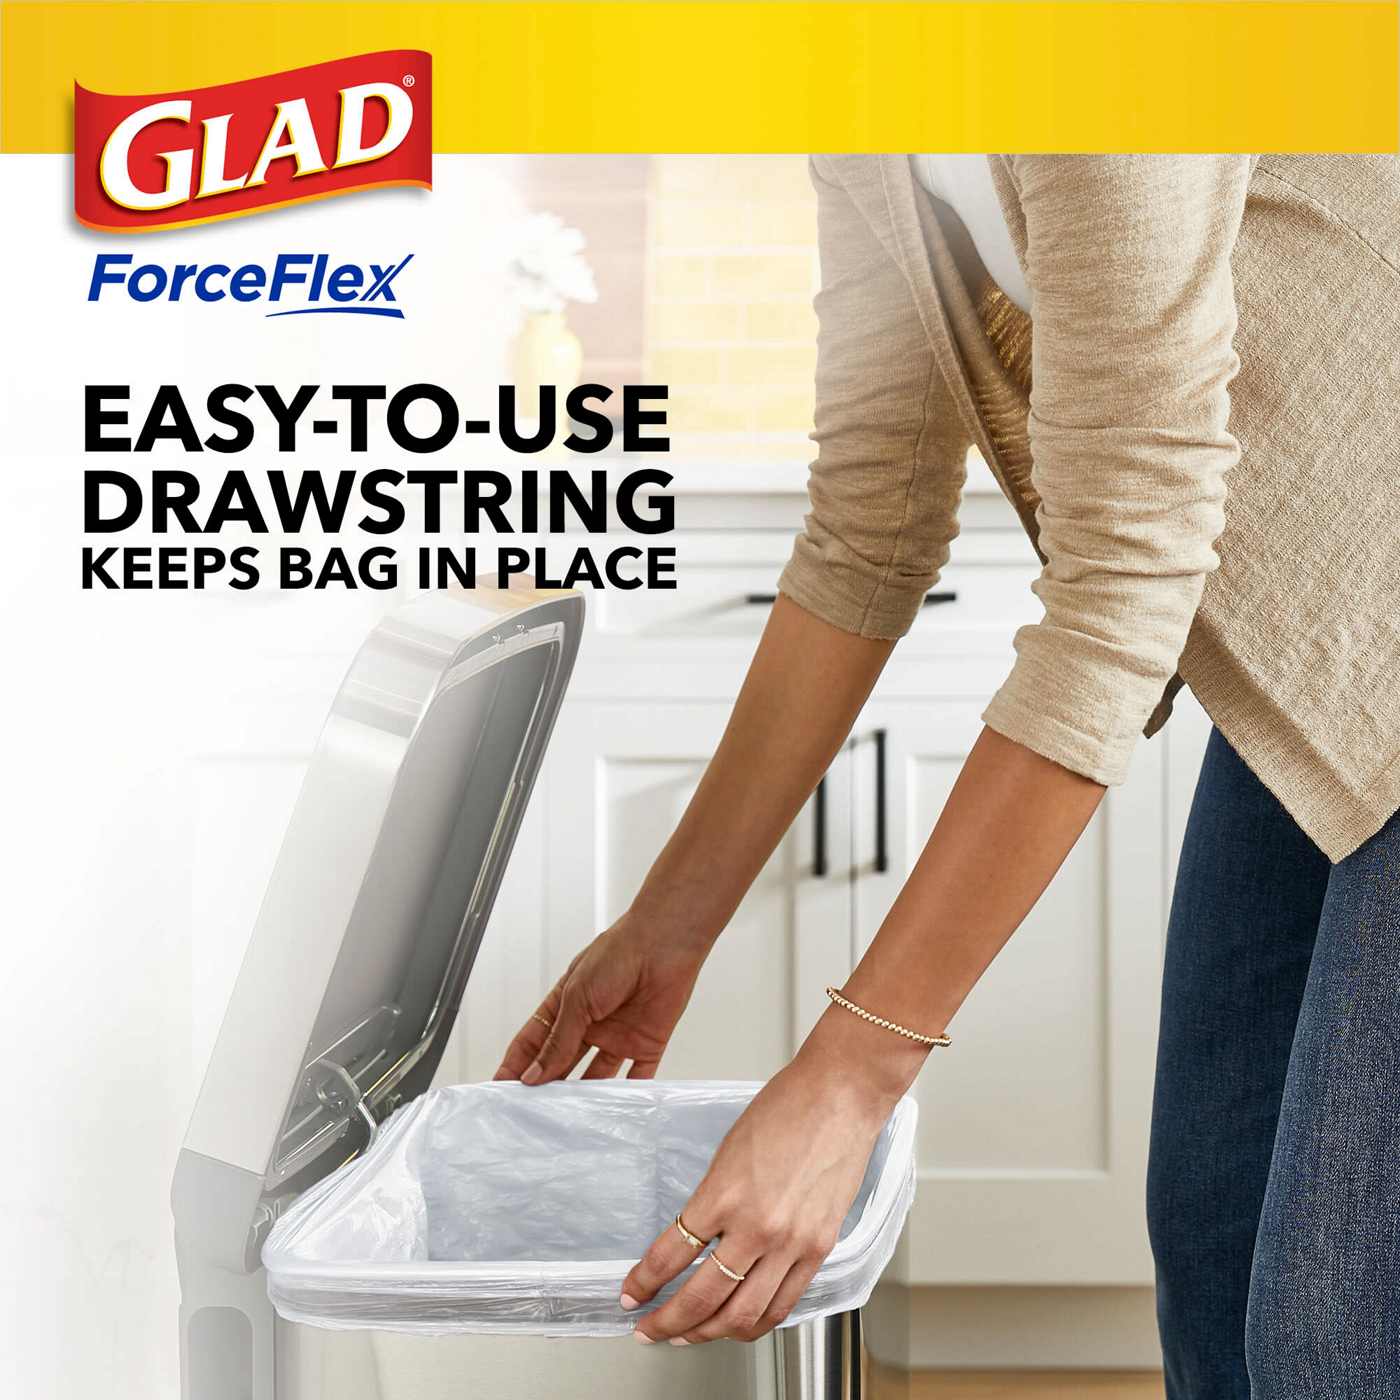 Glad ForceFlex Tall Kitchen Drawstring Trash Bags, 13 Gallon - Gain Lavender Scent with Febreeze Freshness; image 3 of 9